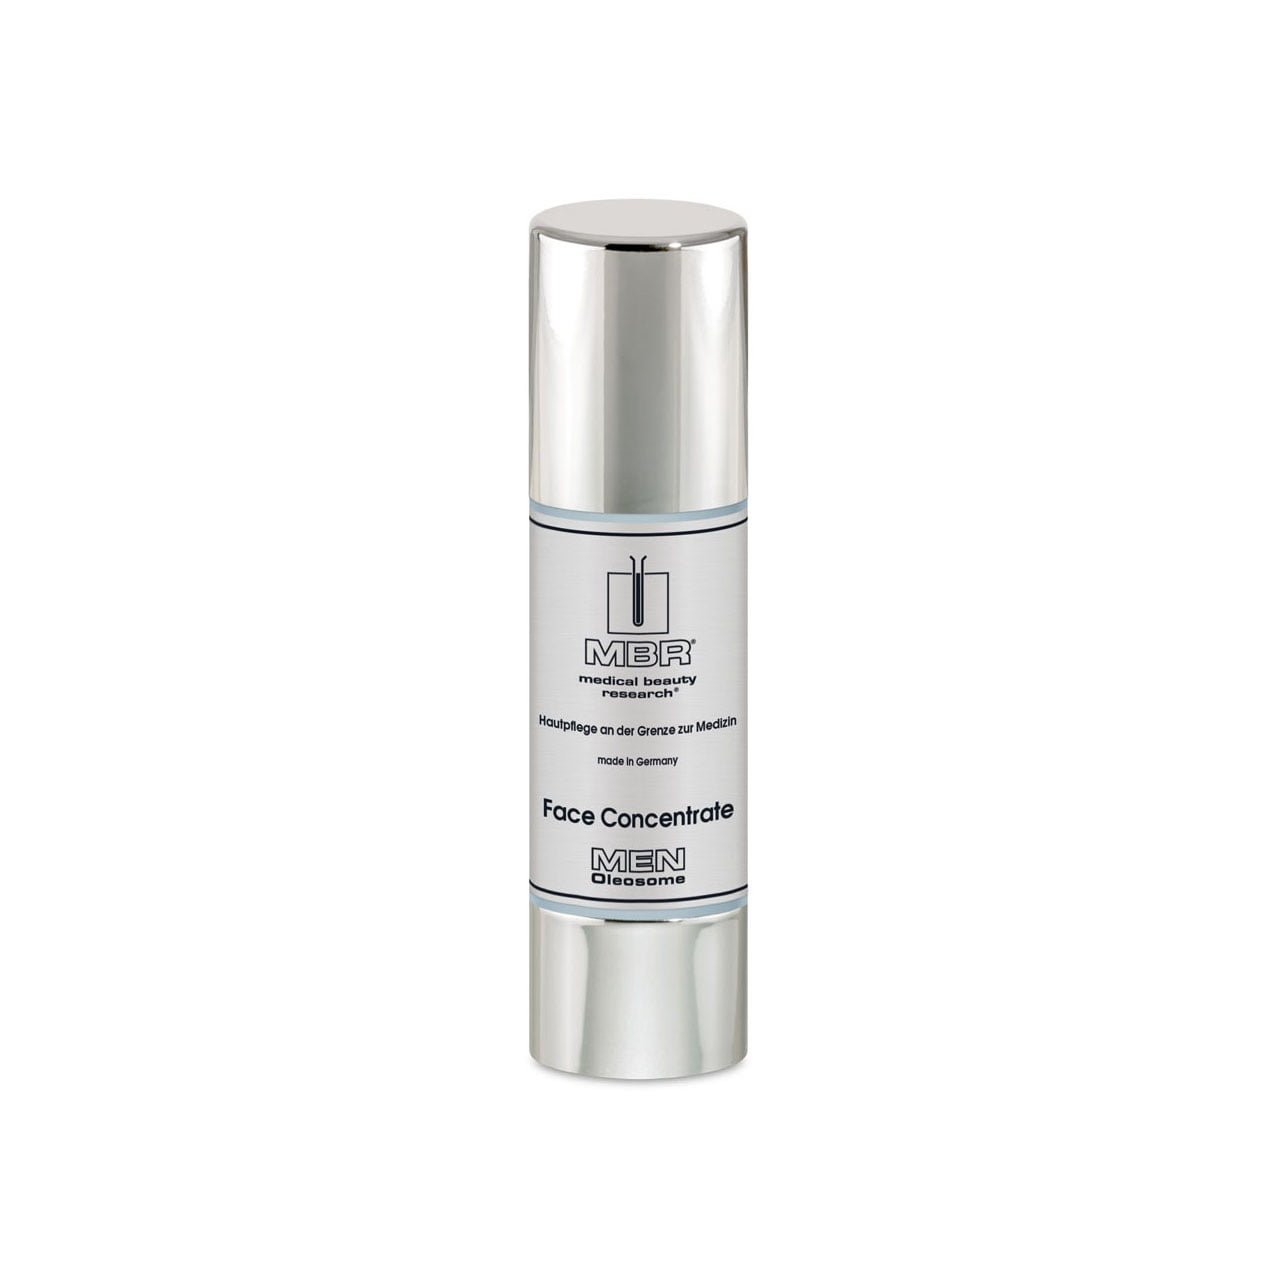 MBR MEN Oleosome Face Concentrate - muse BEAUTY